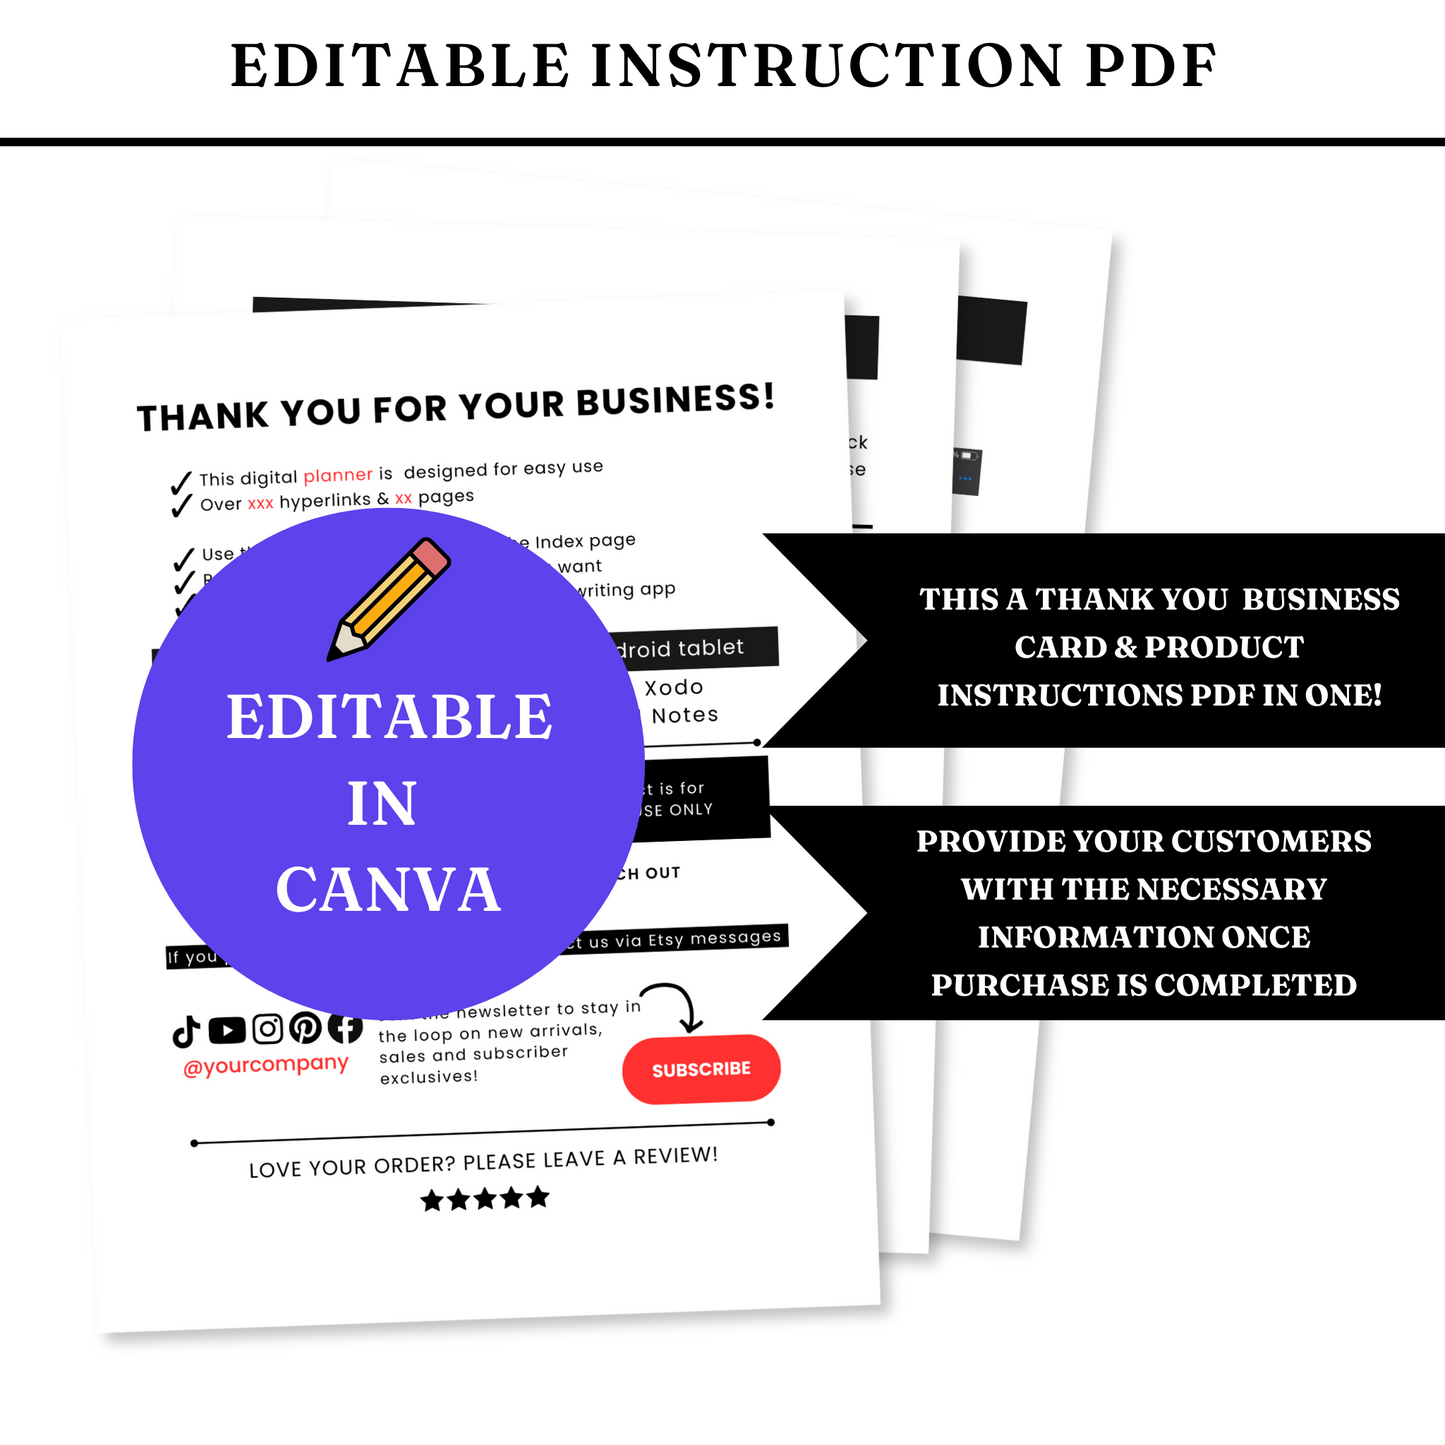 Instructions & Thank You Template - PLR